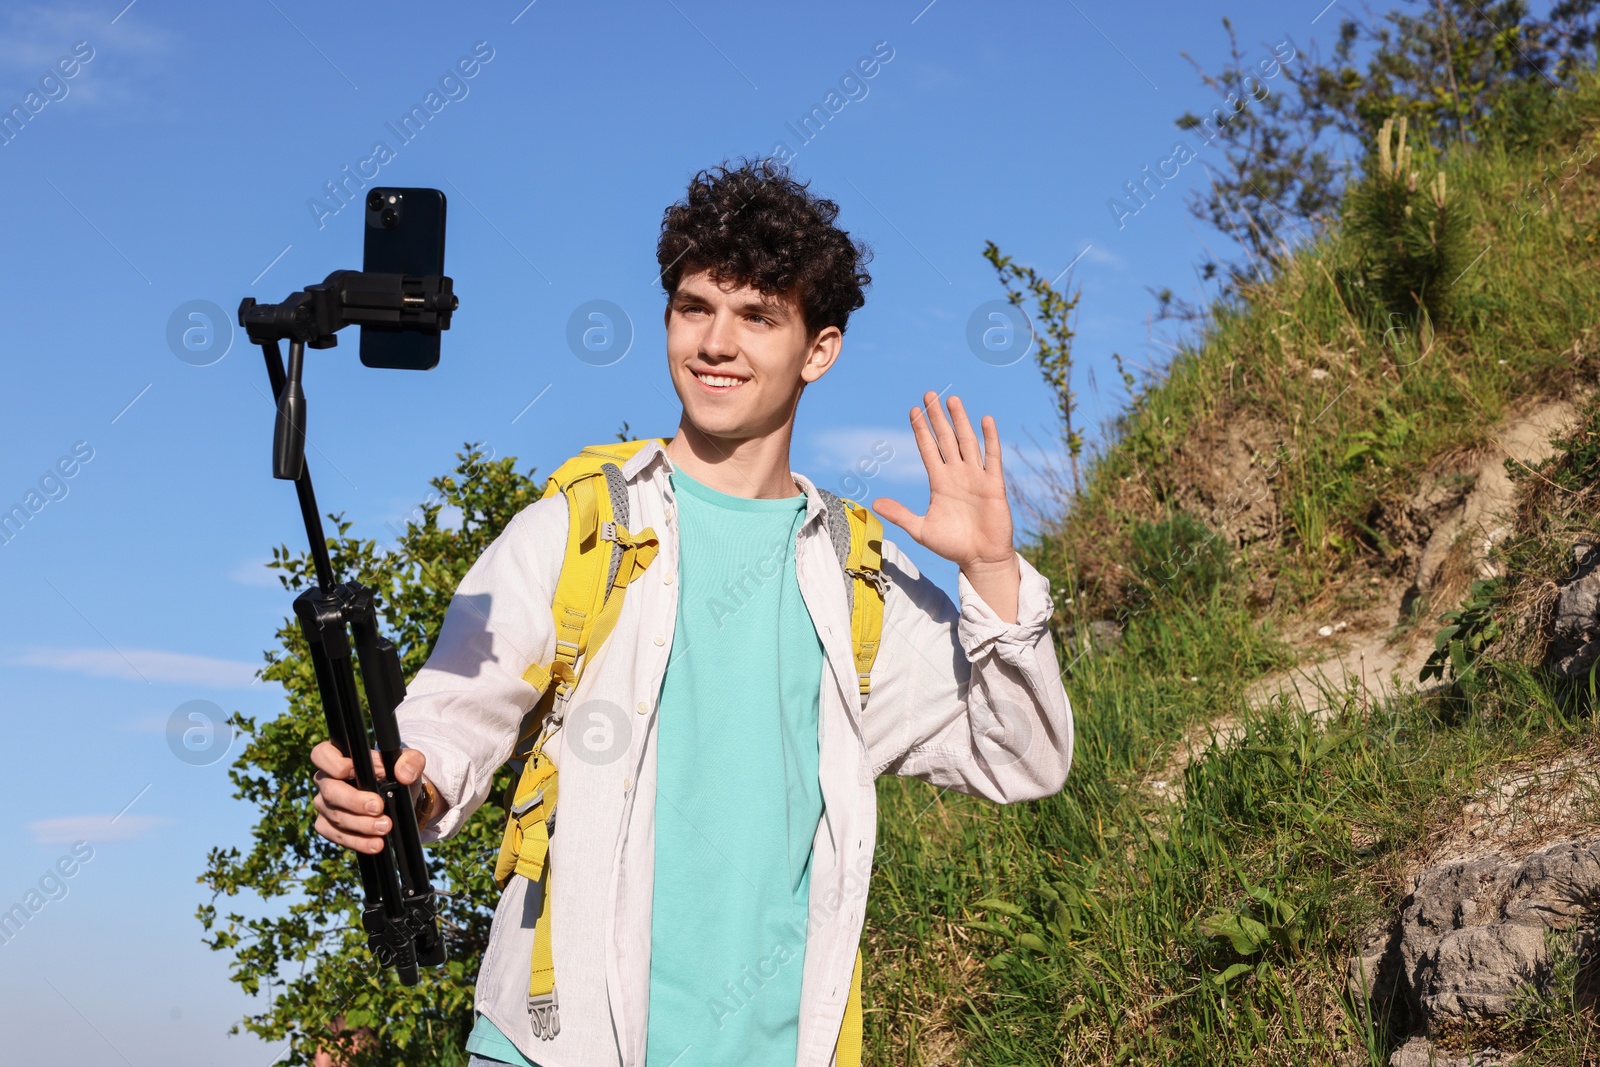 Photo of Travel blogger with smartphone and tripod streaming outdoors